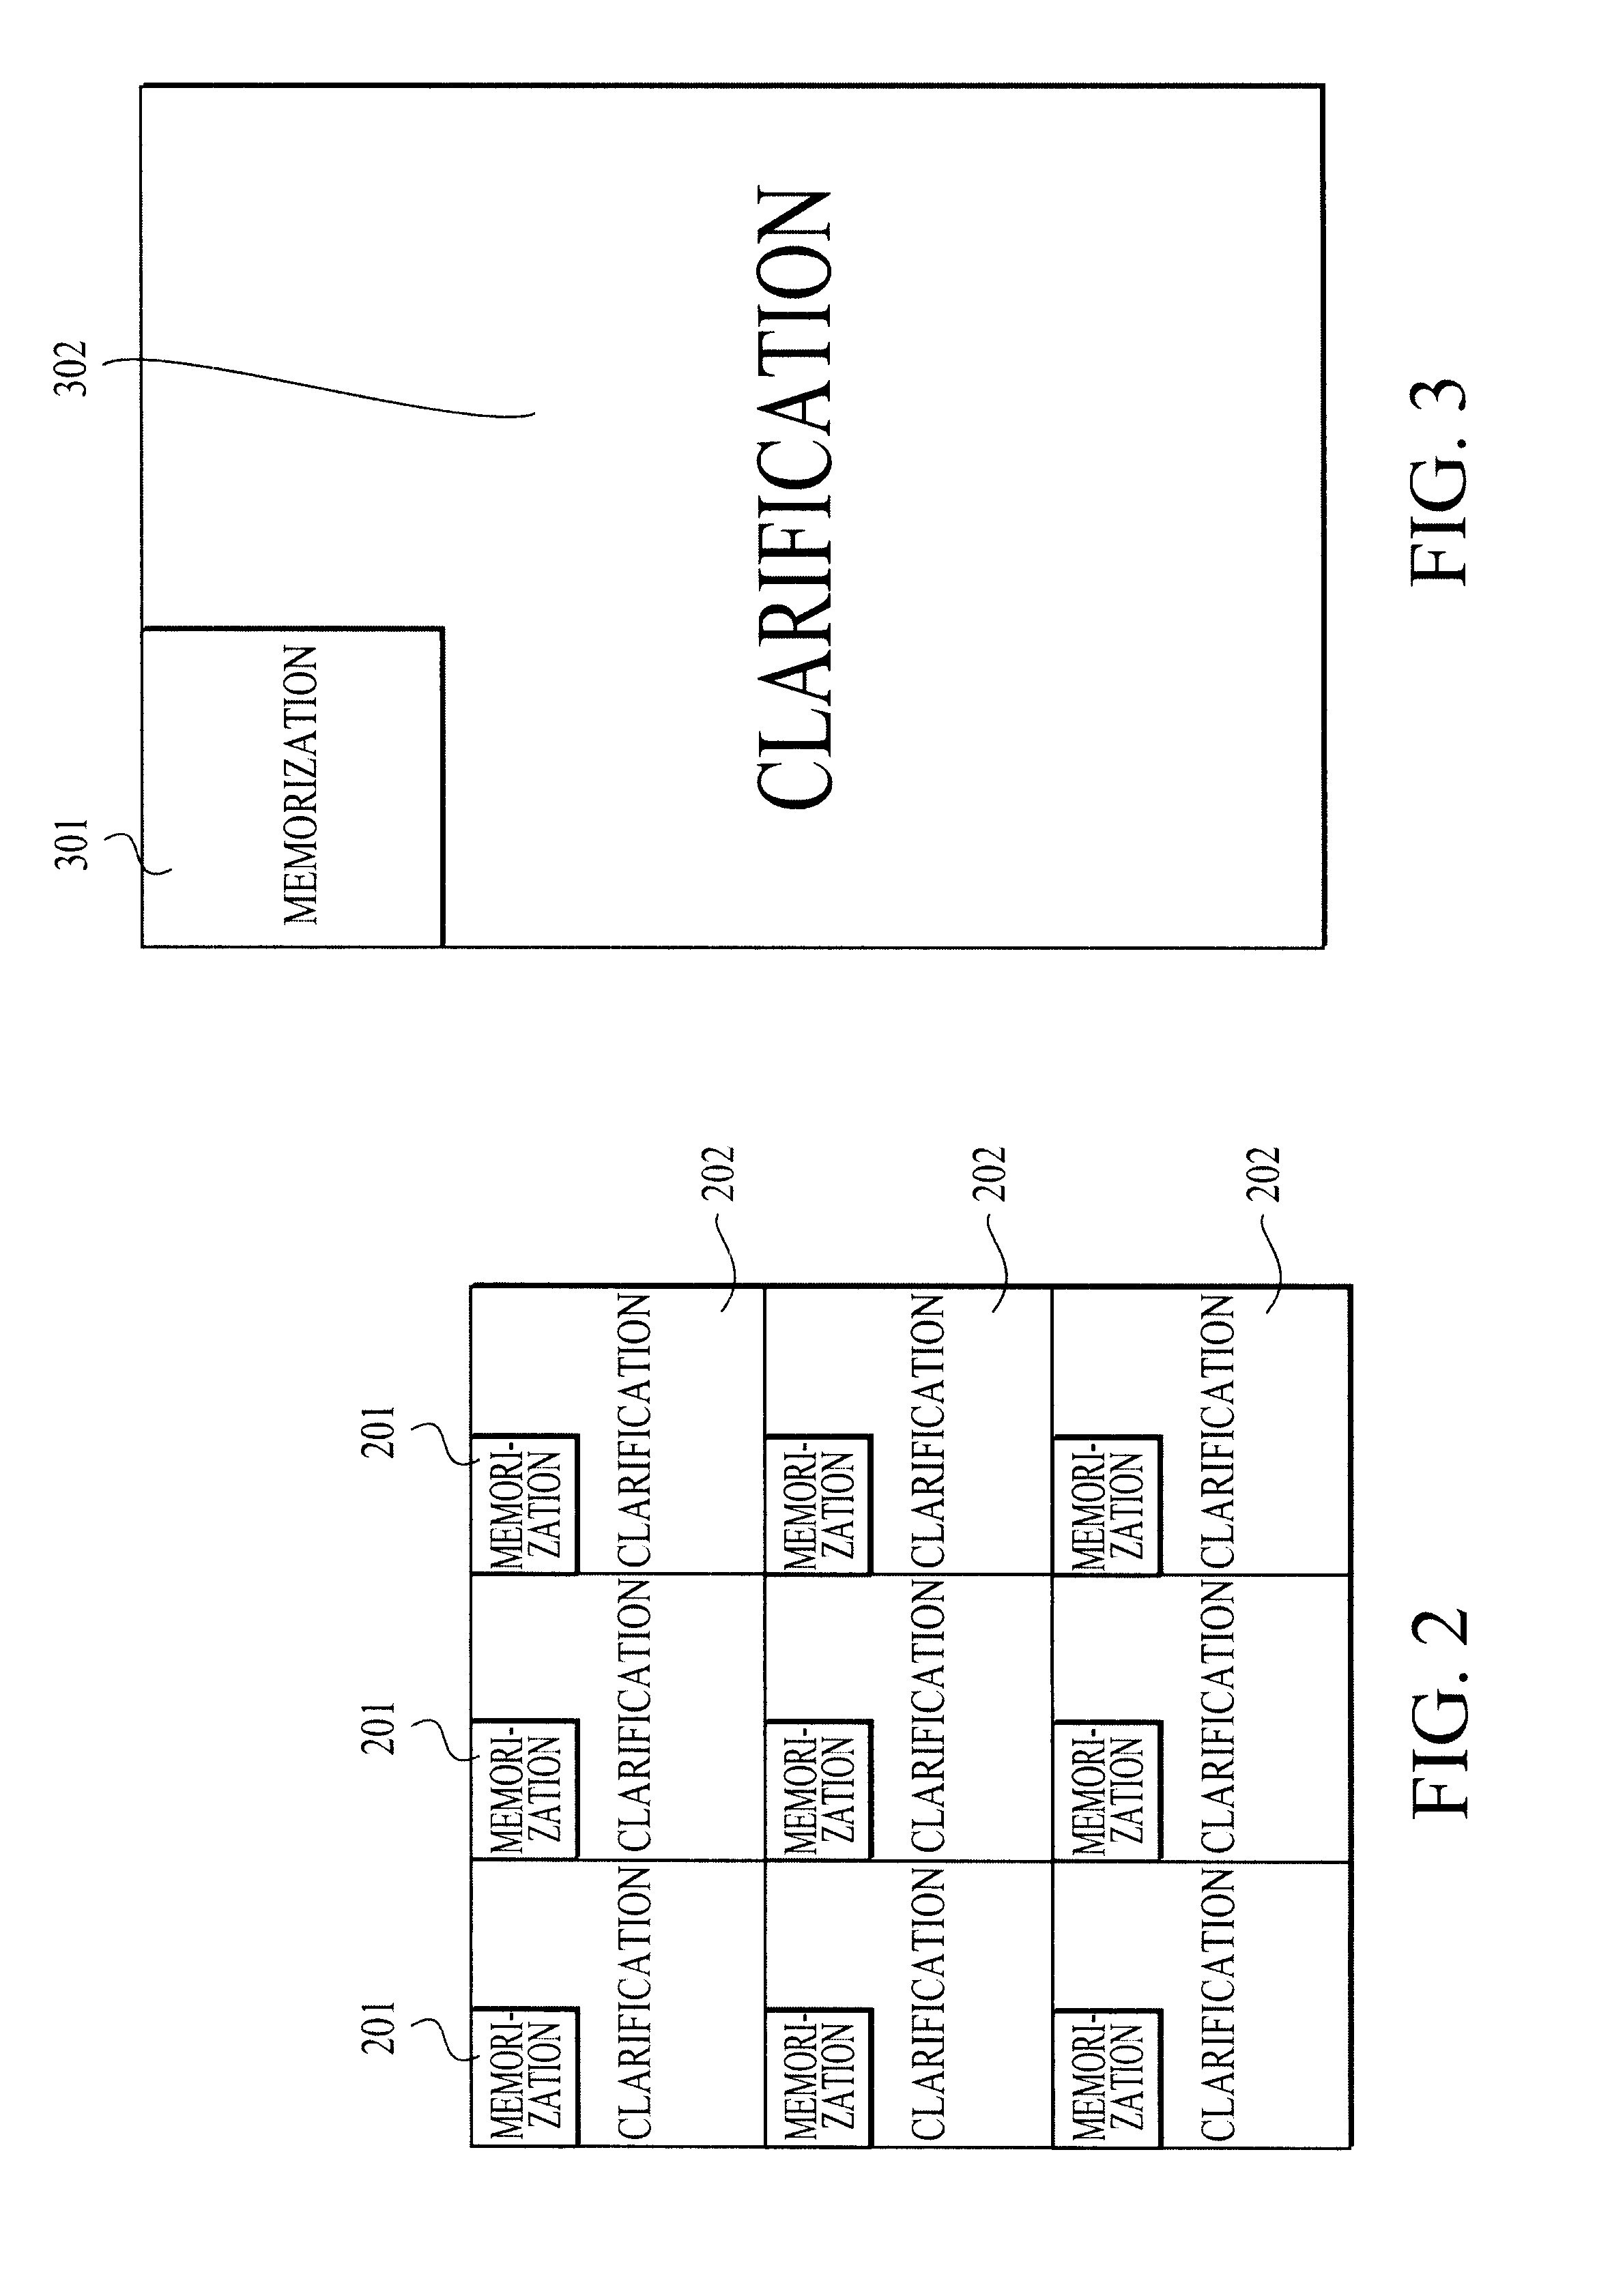 Method and device for finding, collecting and acting upon units of information